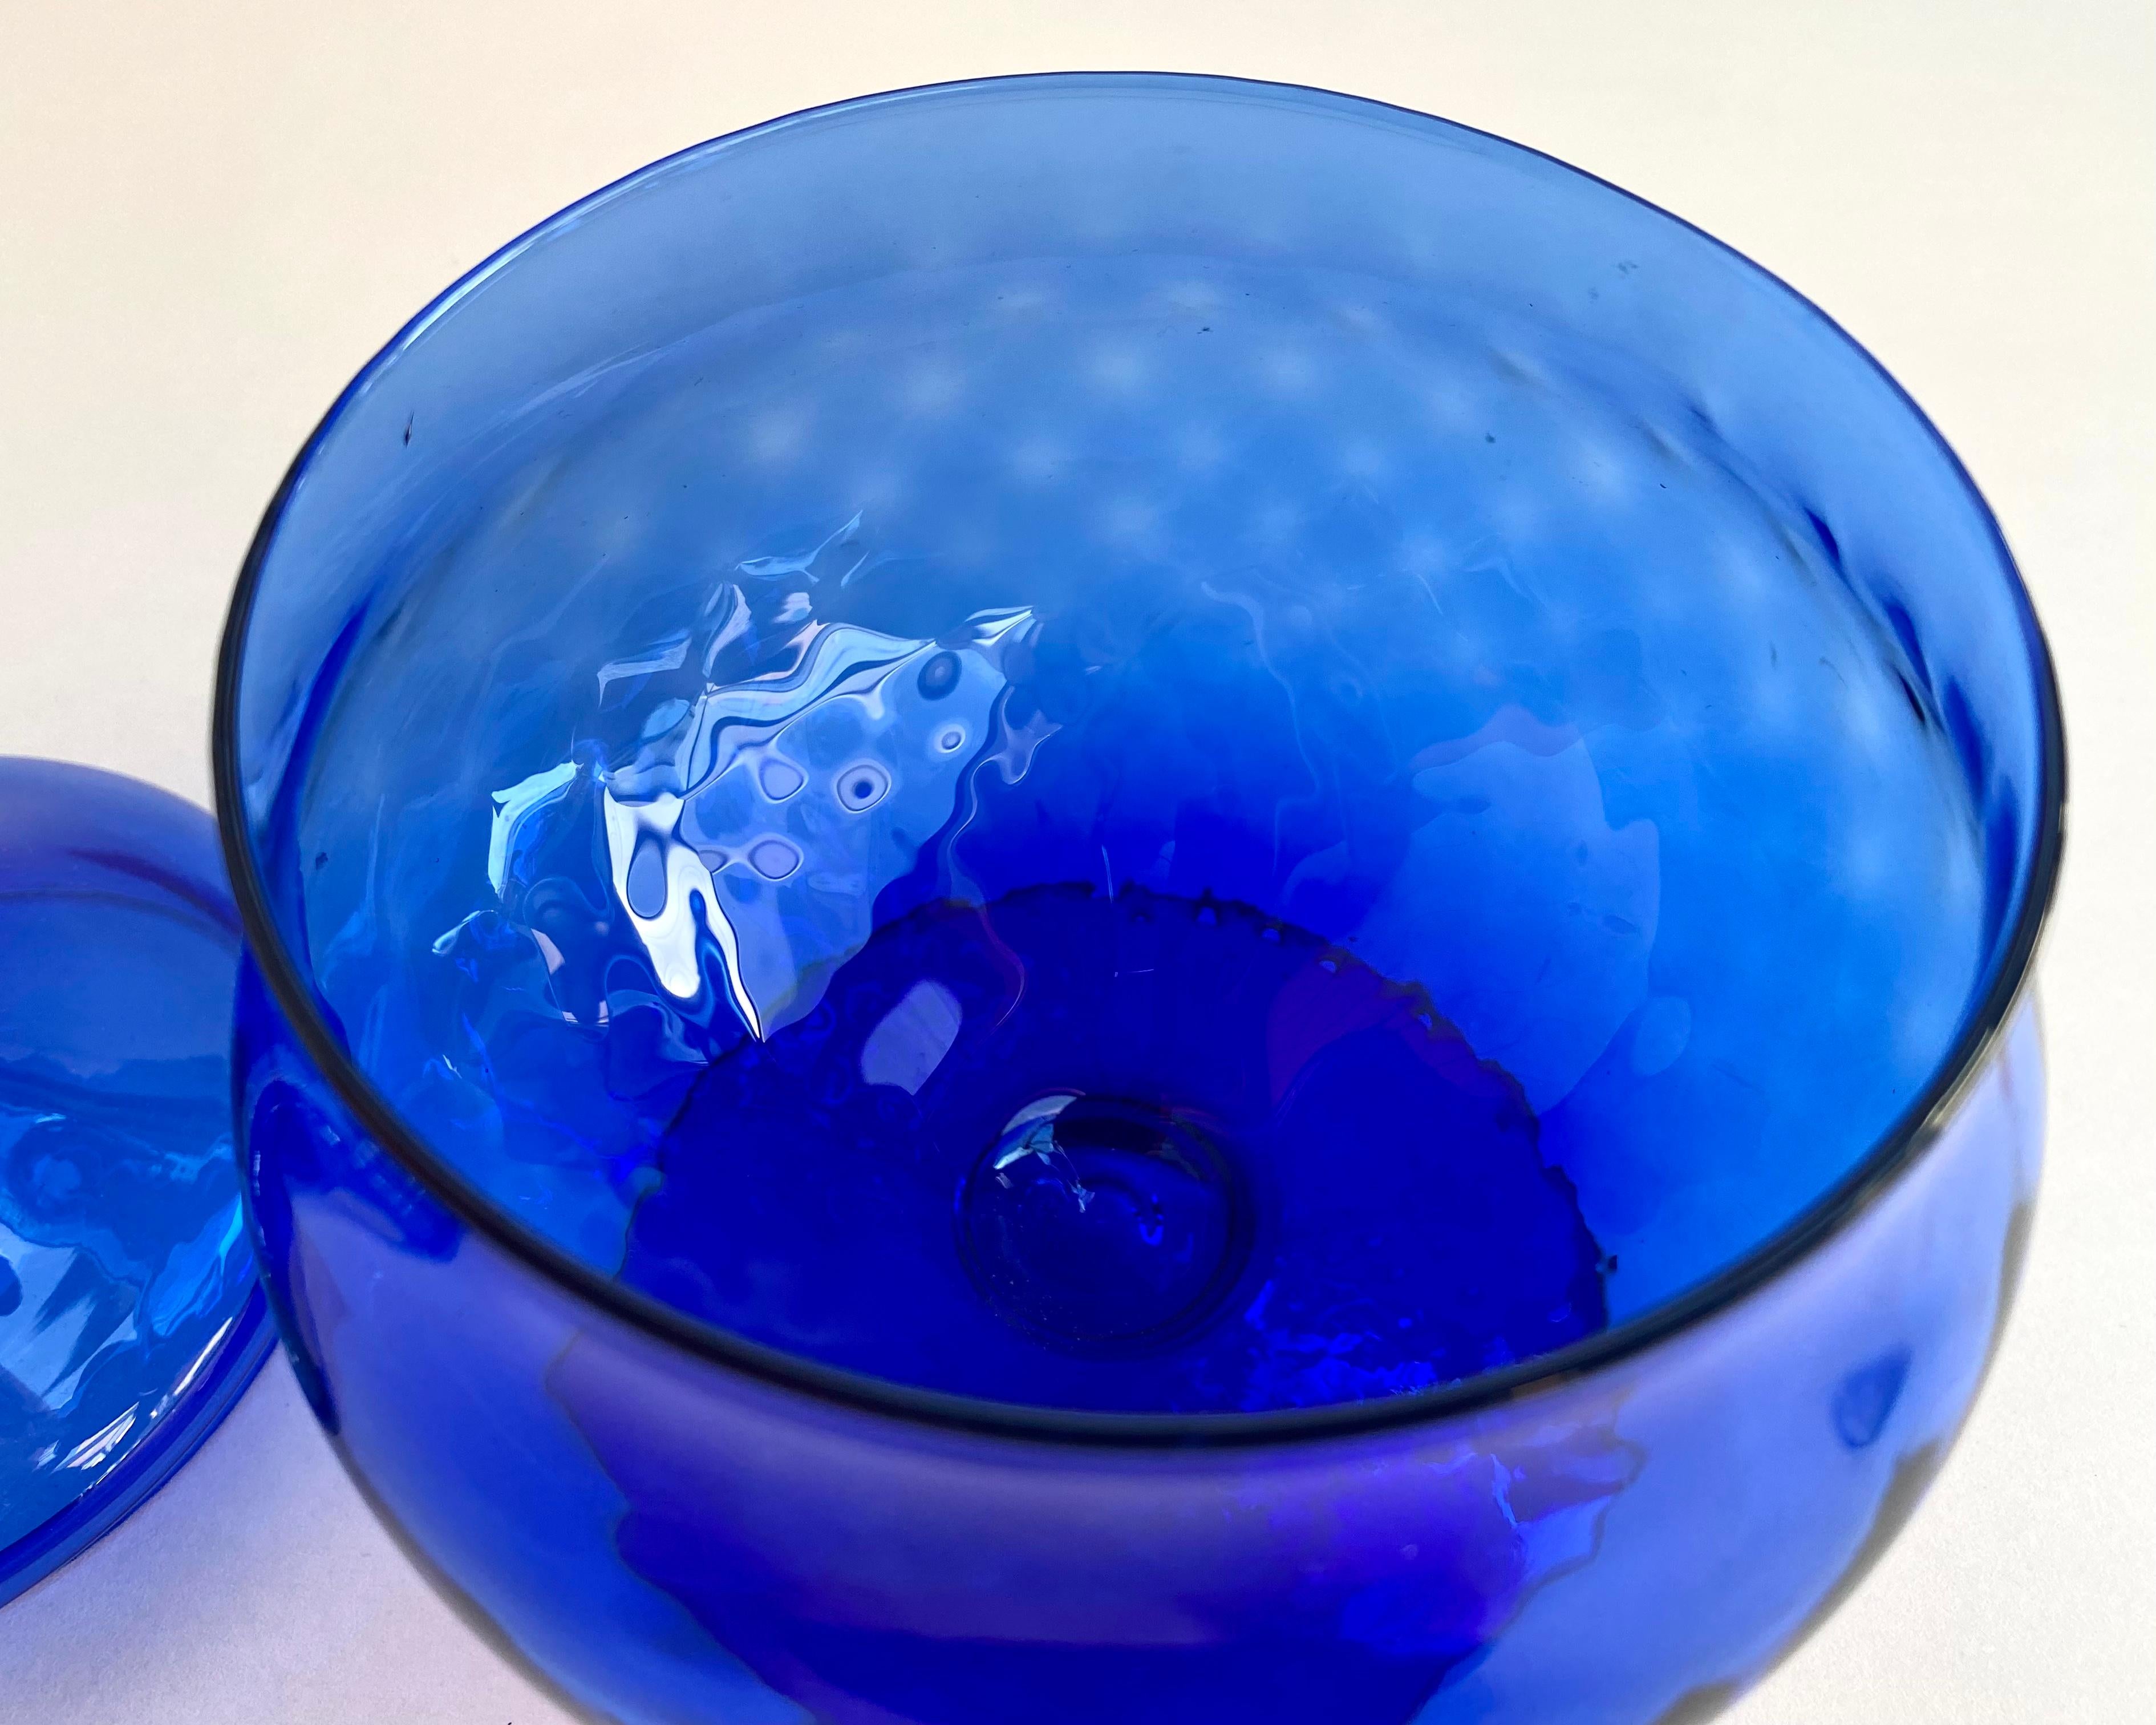 Vintage midcentury jar with lid for sweets in cobalt blue glass with stem.

Italy, 1970s.

Beautiful Vintage Italian Glass. Amazing color and shape. Rare find from the 1970s!

You can use it for candy, trinkets, honey, cookies.

The candy